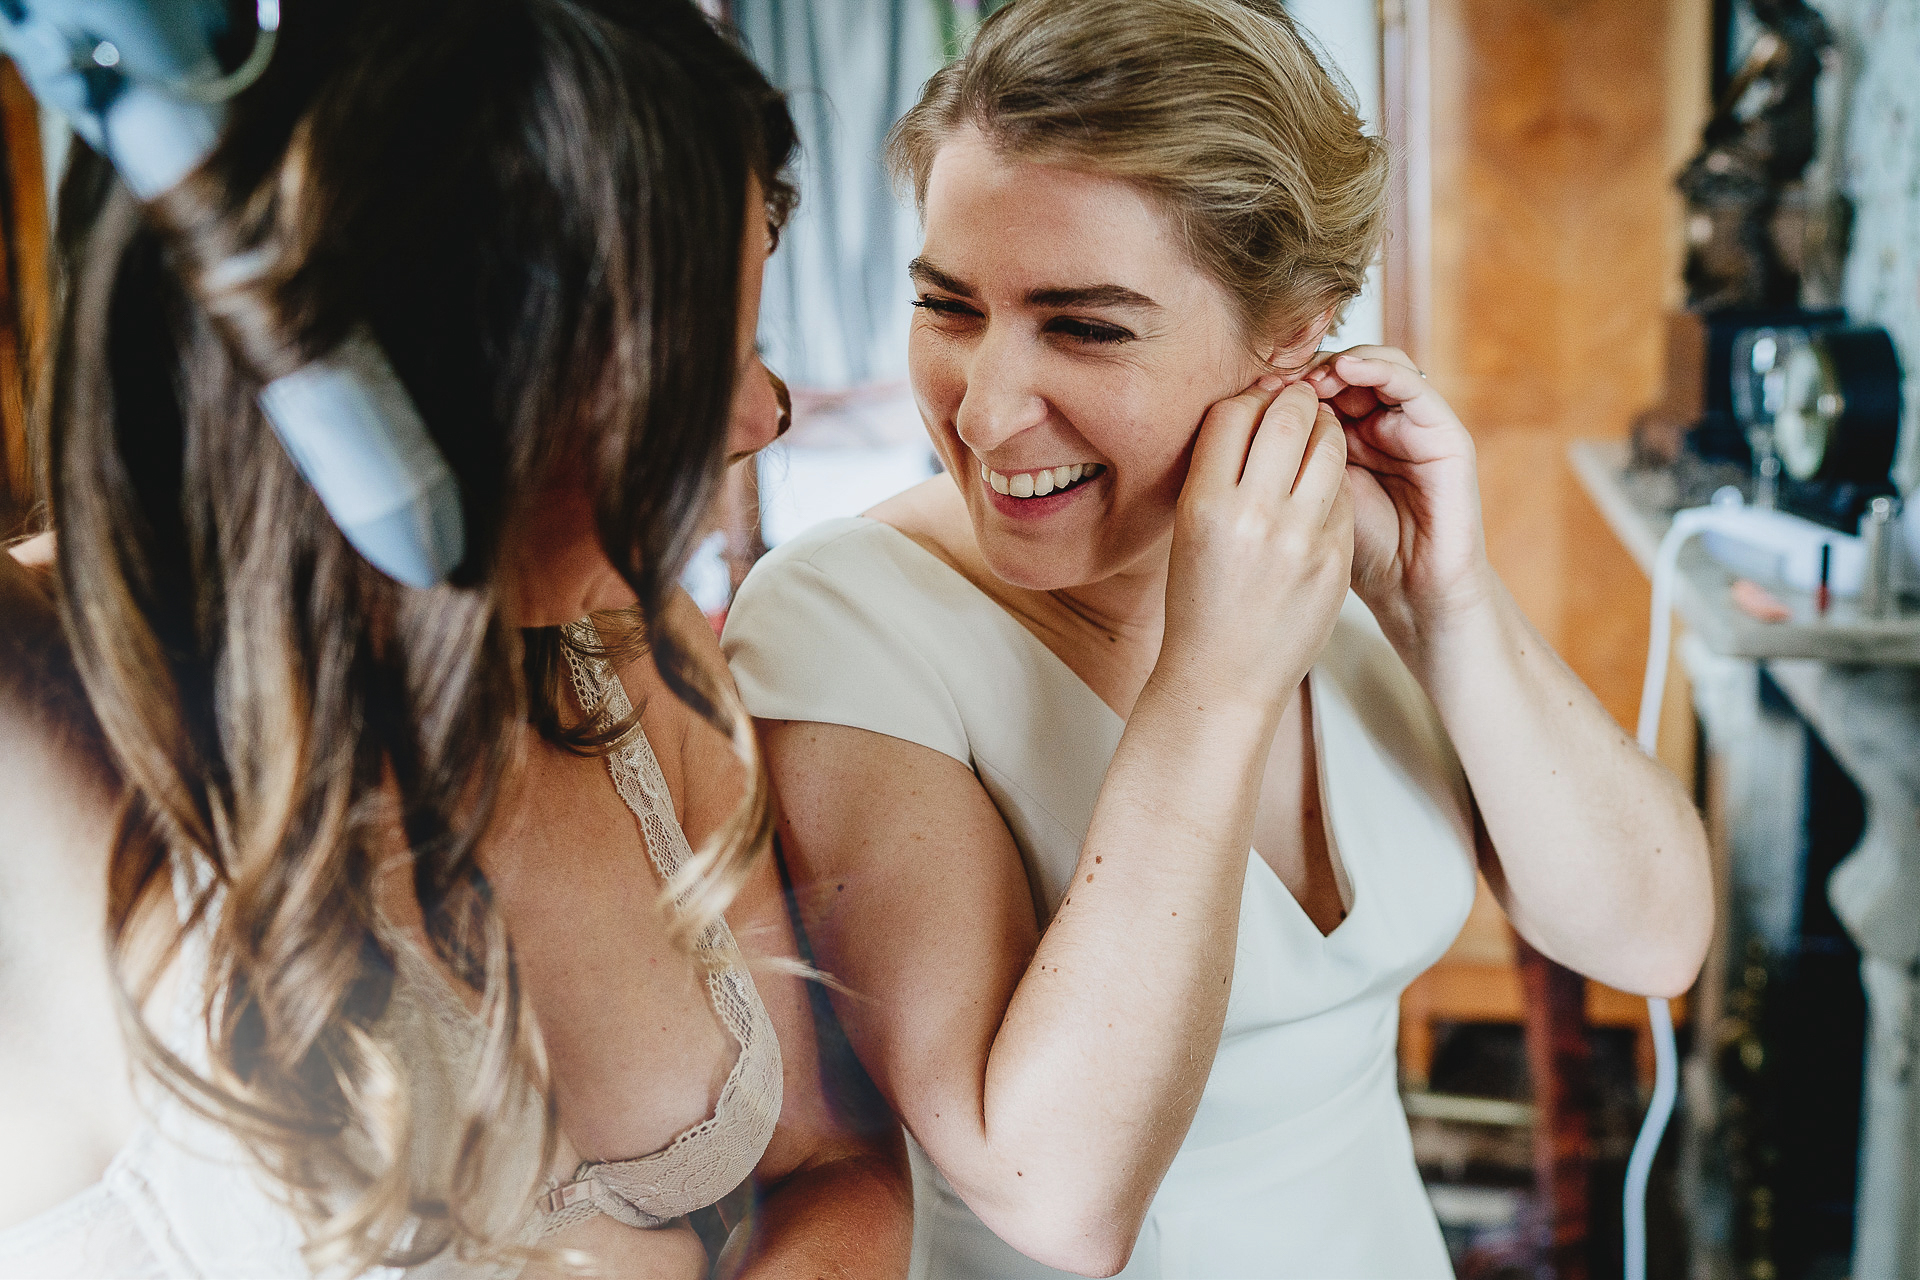 Bride smiling joyfully while getting ready with bridesmaid